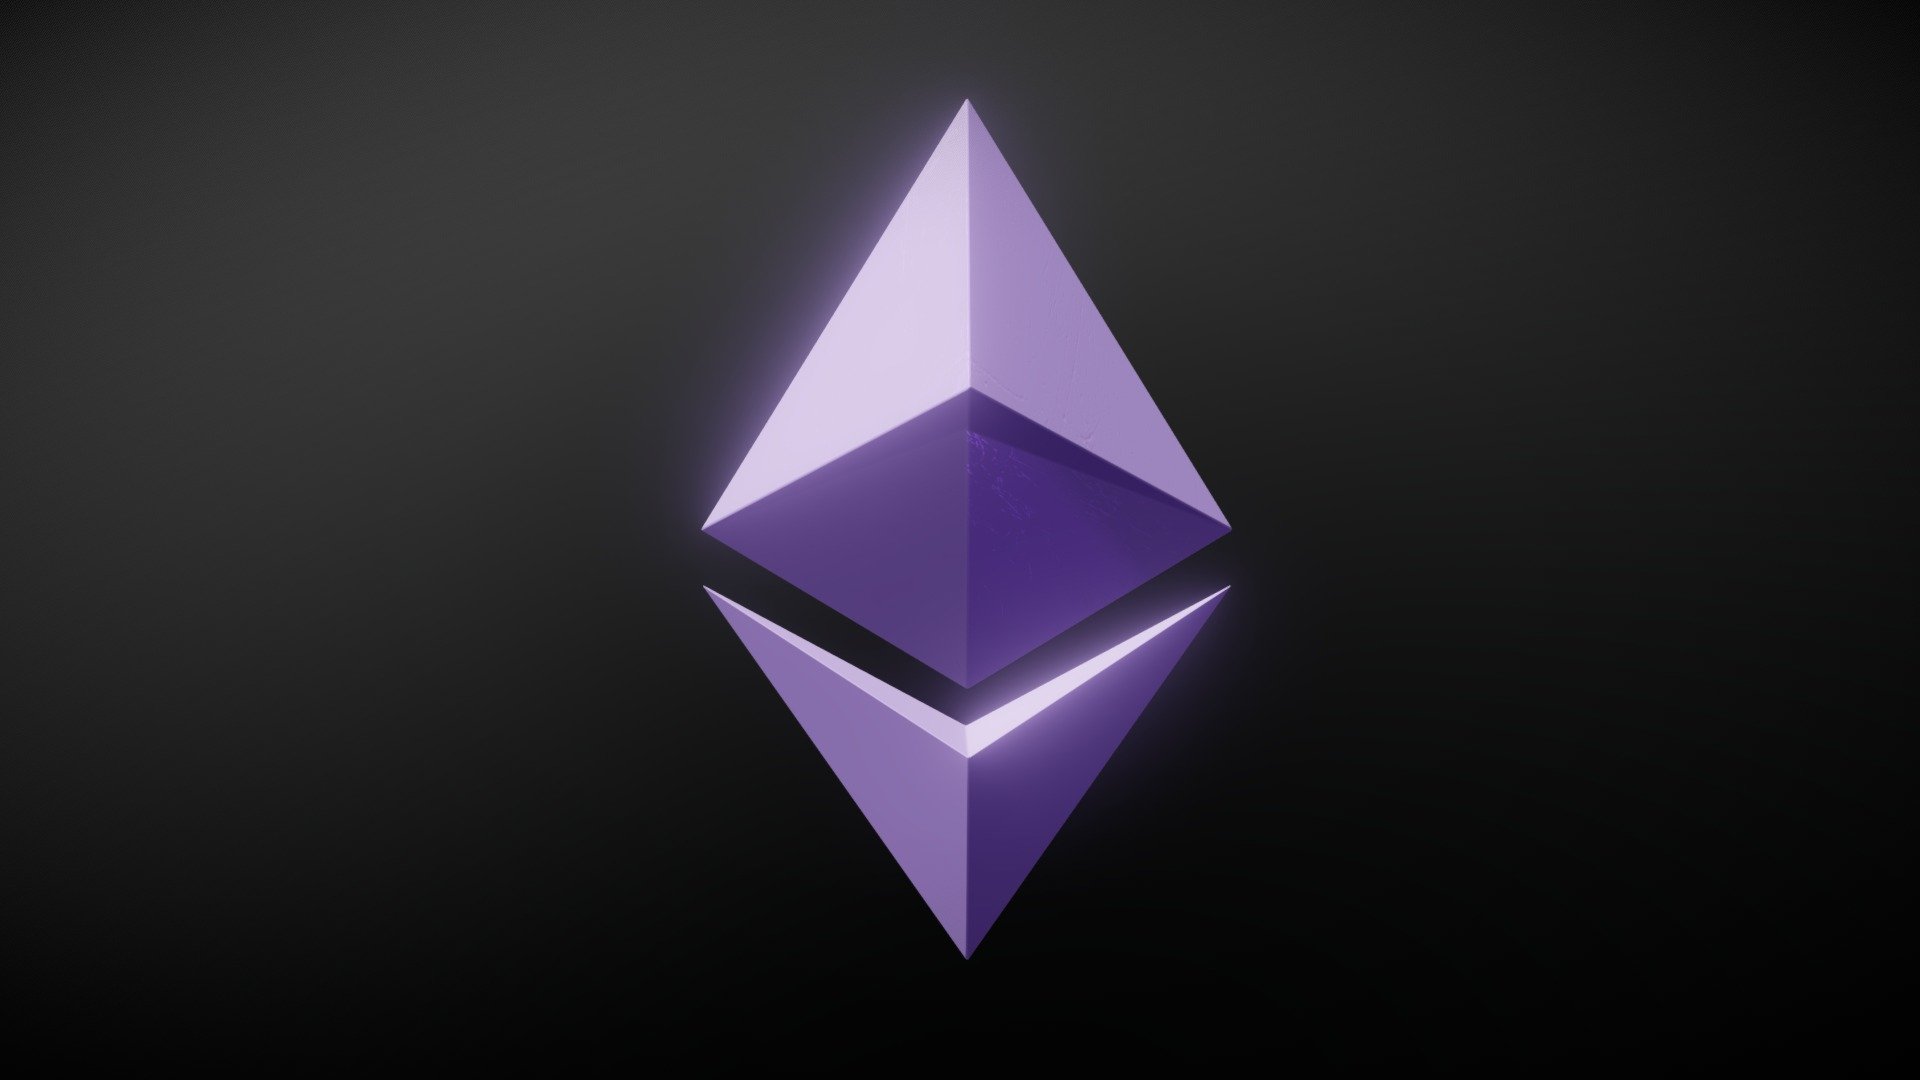 Ethereum 3d logo free for use

To the author for cup of coffee donate on address:
0x28c8122b4D206De5912056FD34cCB234198414fB - Ethereum 3D logo - Download Free 3D model by Akimovcg 3d model